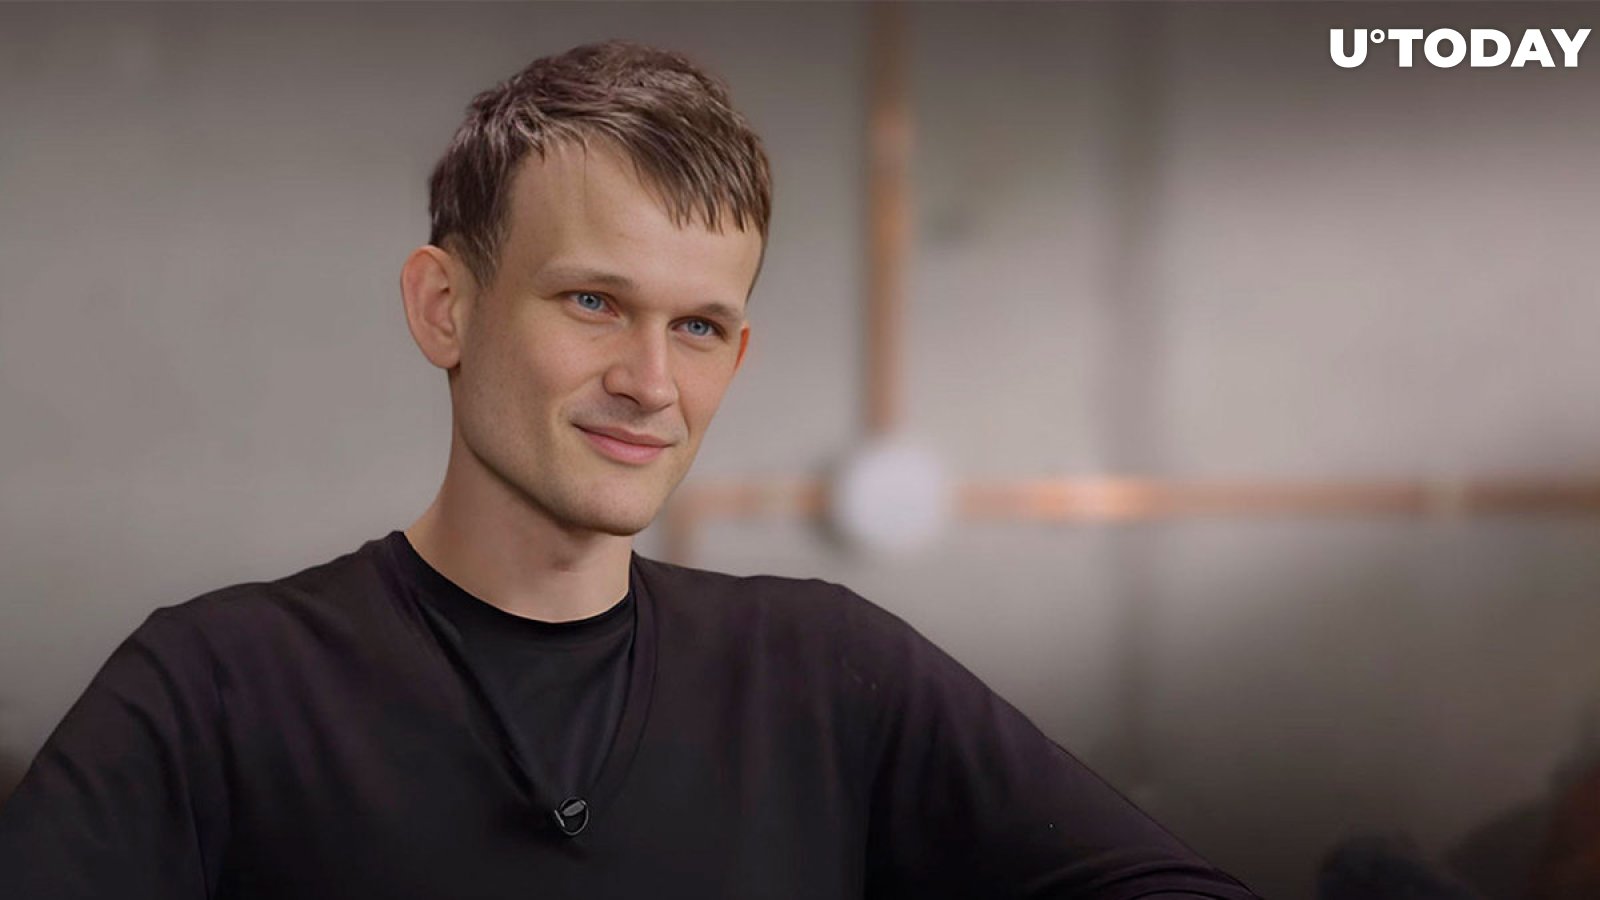 Here's How Rich Ethereum Founder Vitalik Buterin Really Is